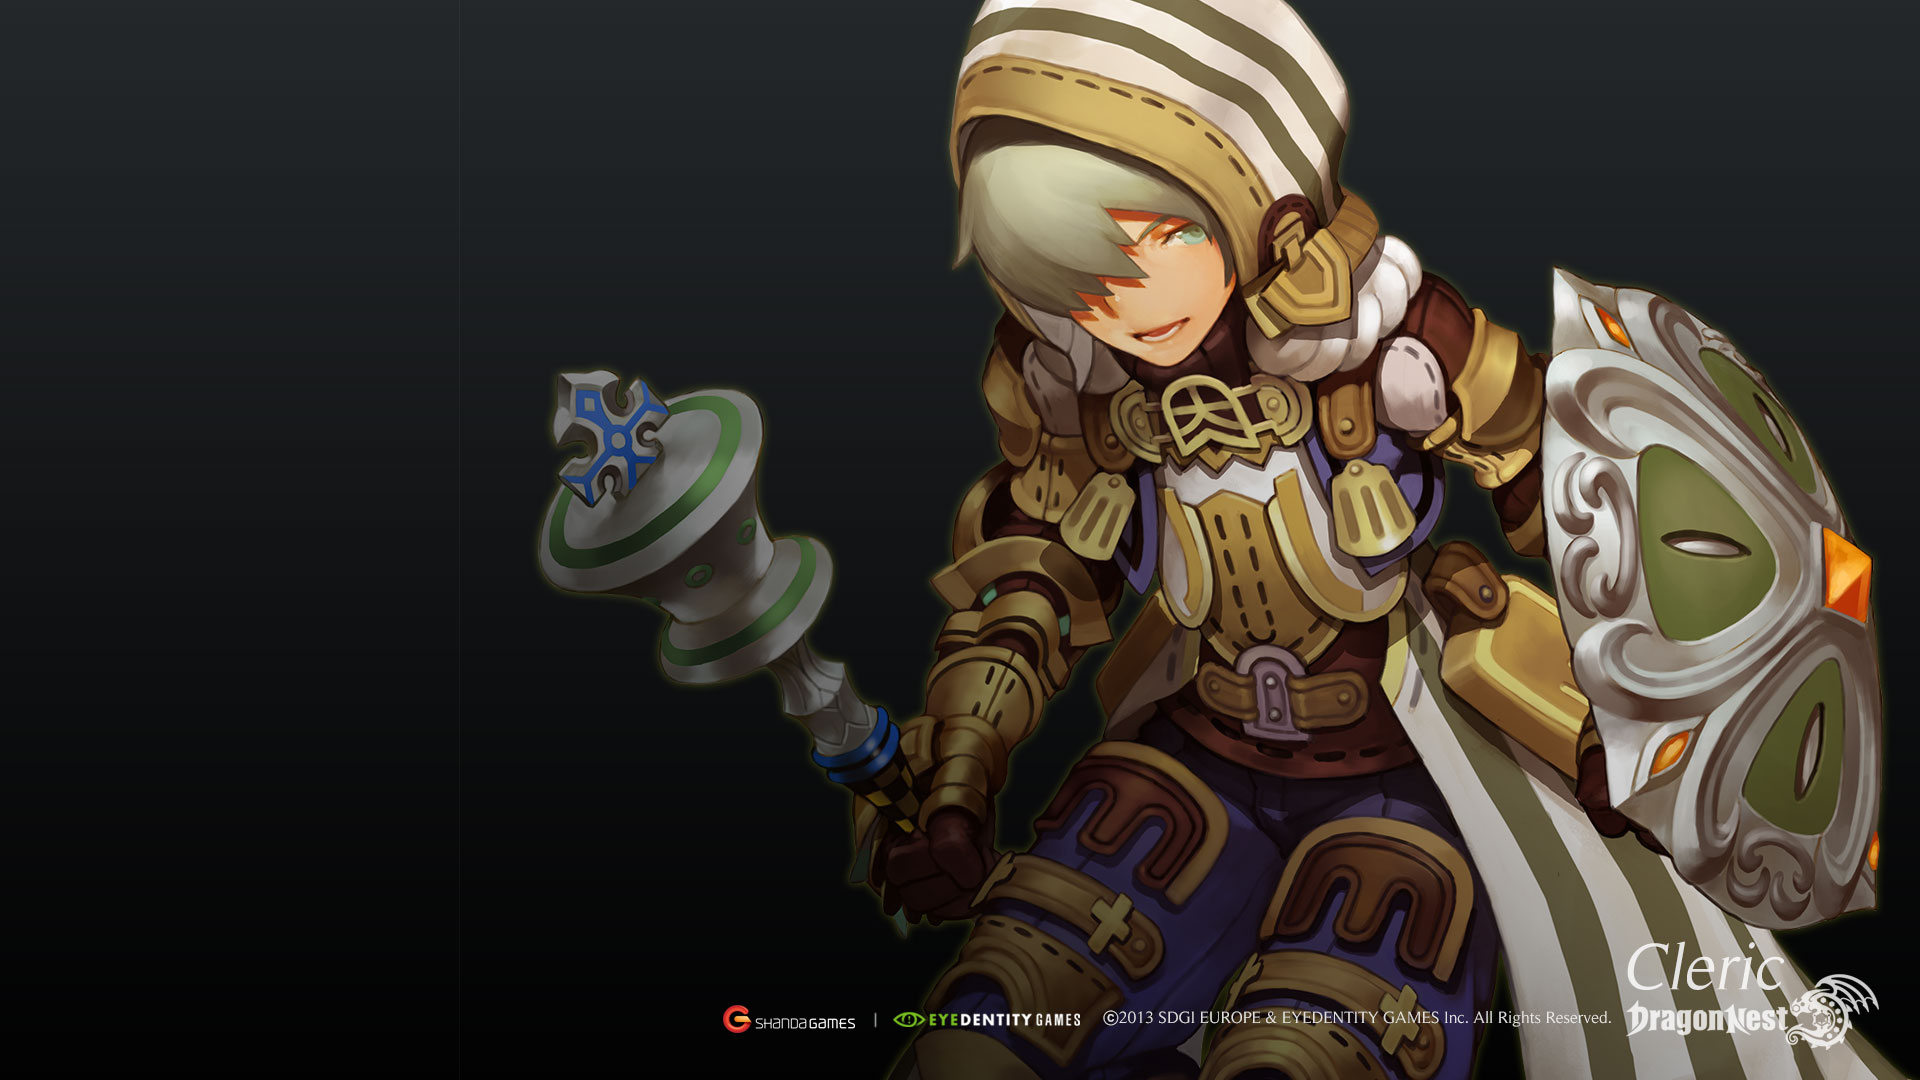 Dragon Nest Europe To Play Online Action Rpg